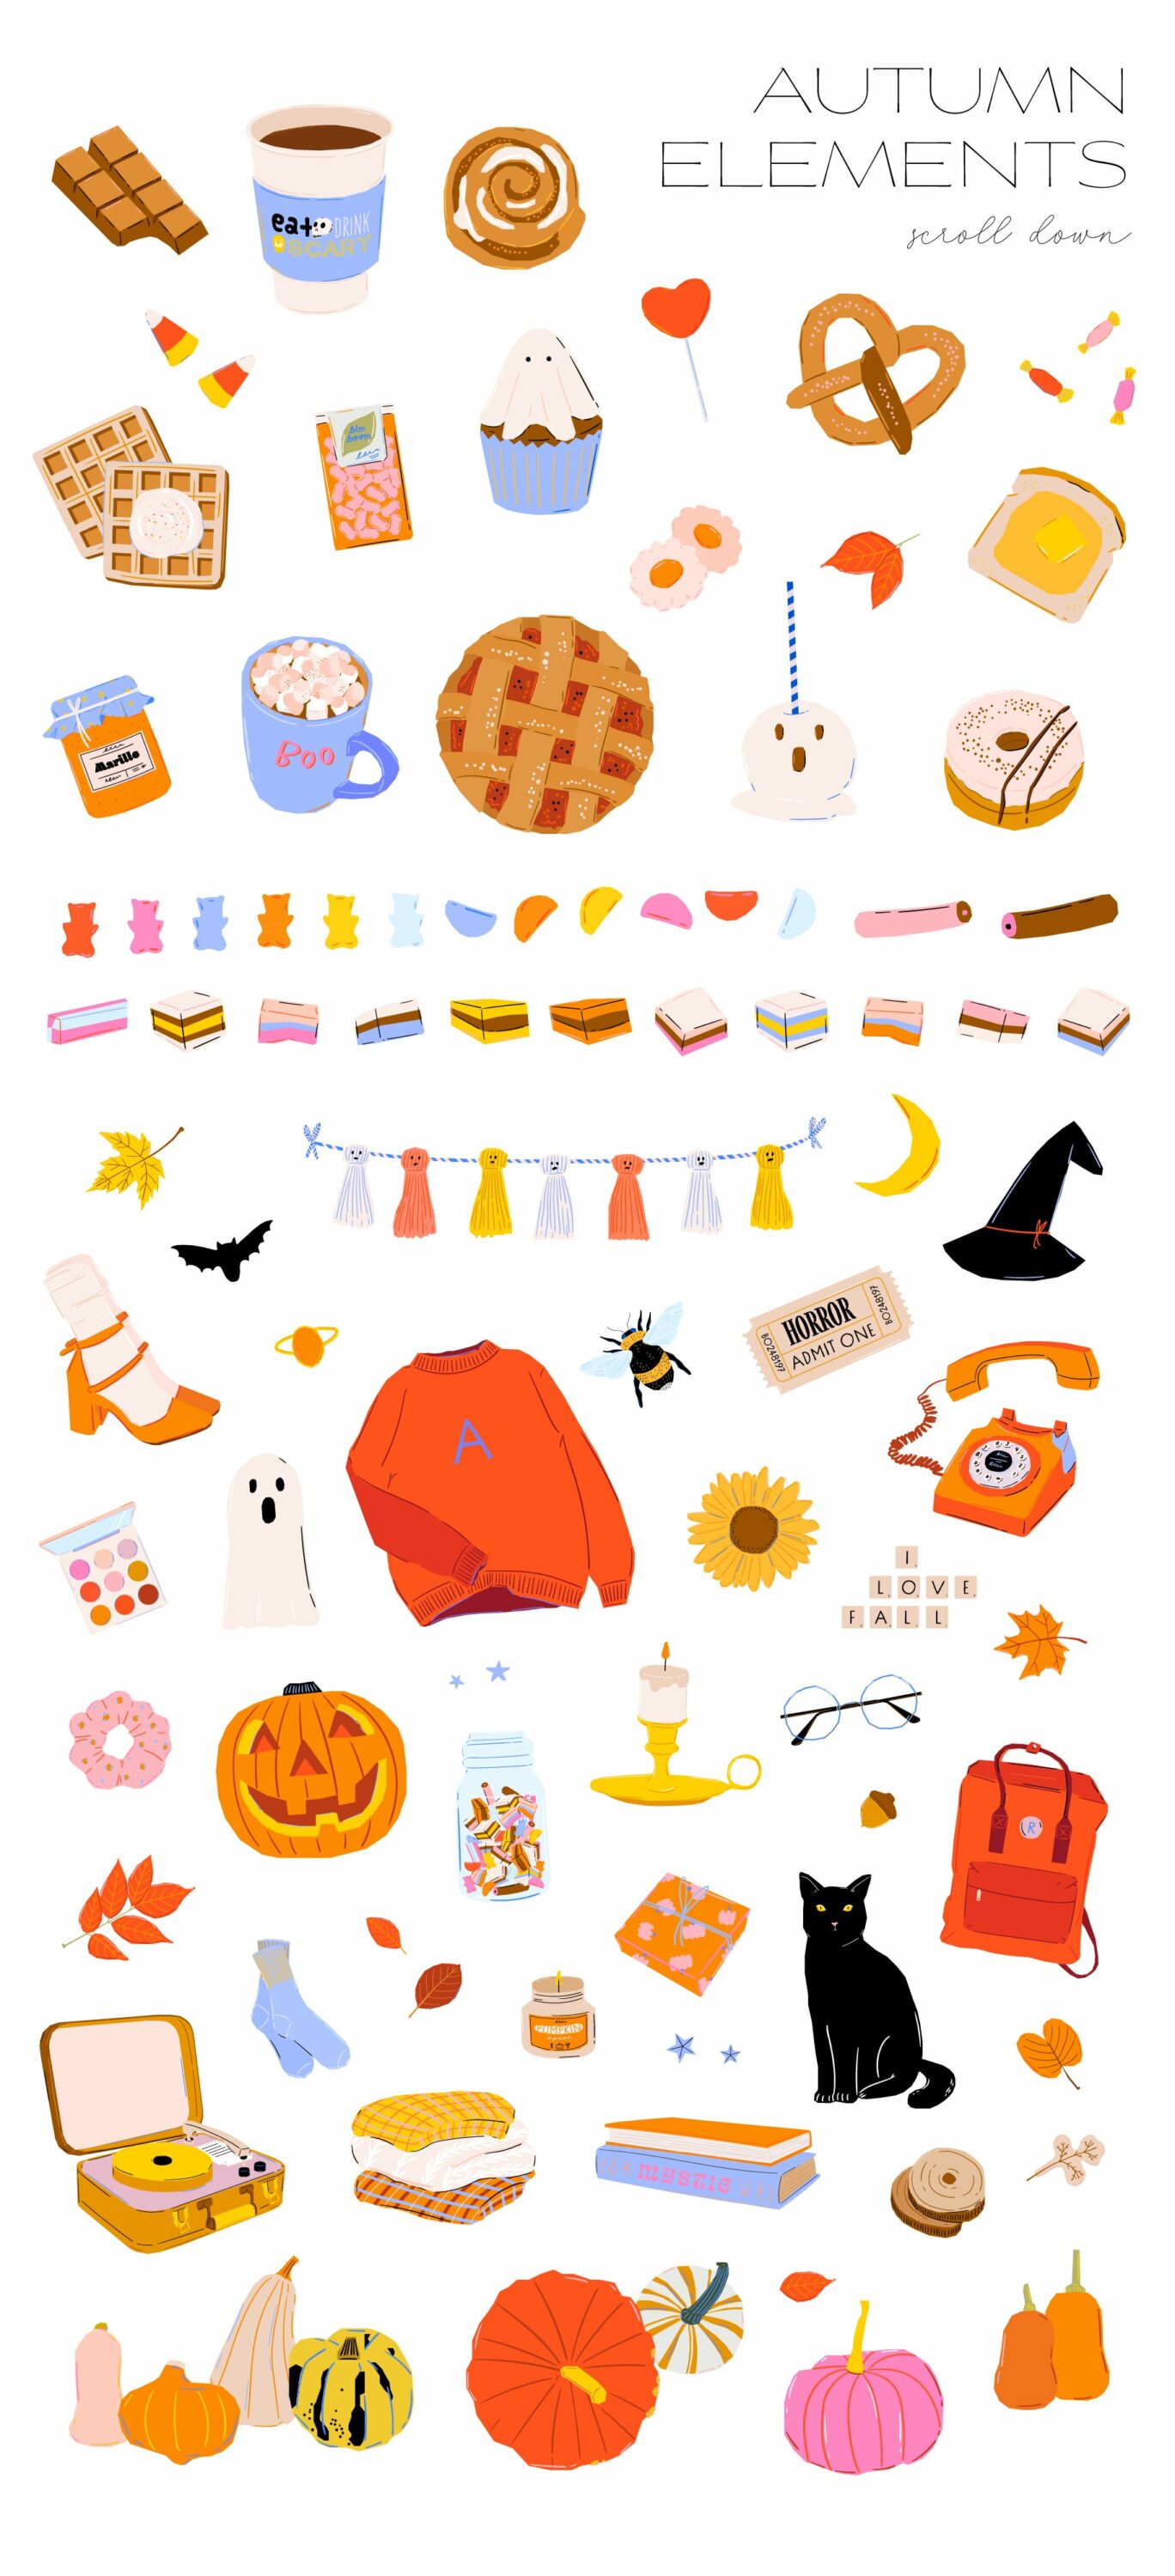 Small elements for interesting and warm fall illustrations.